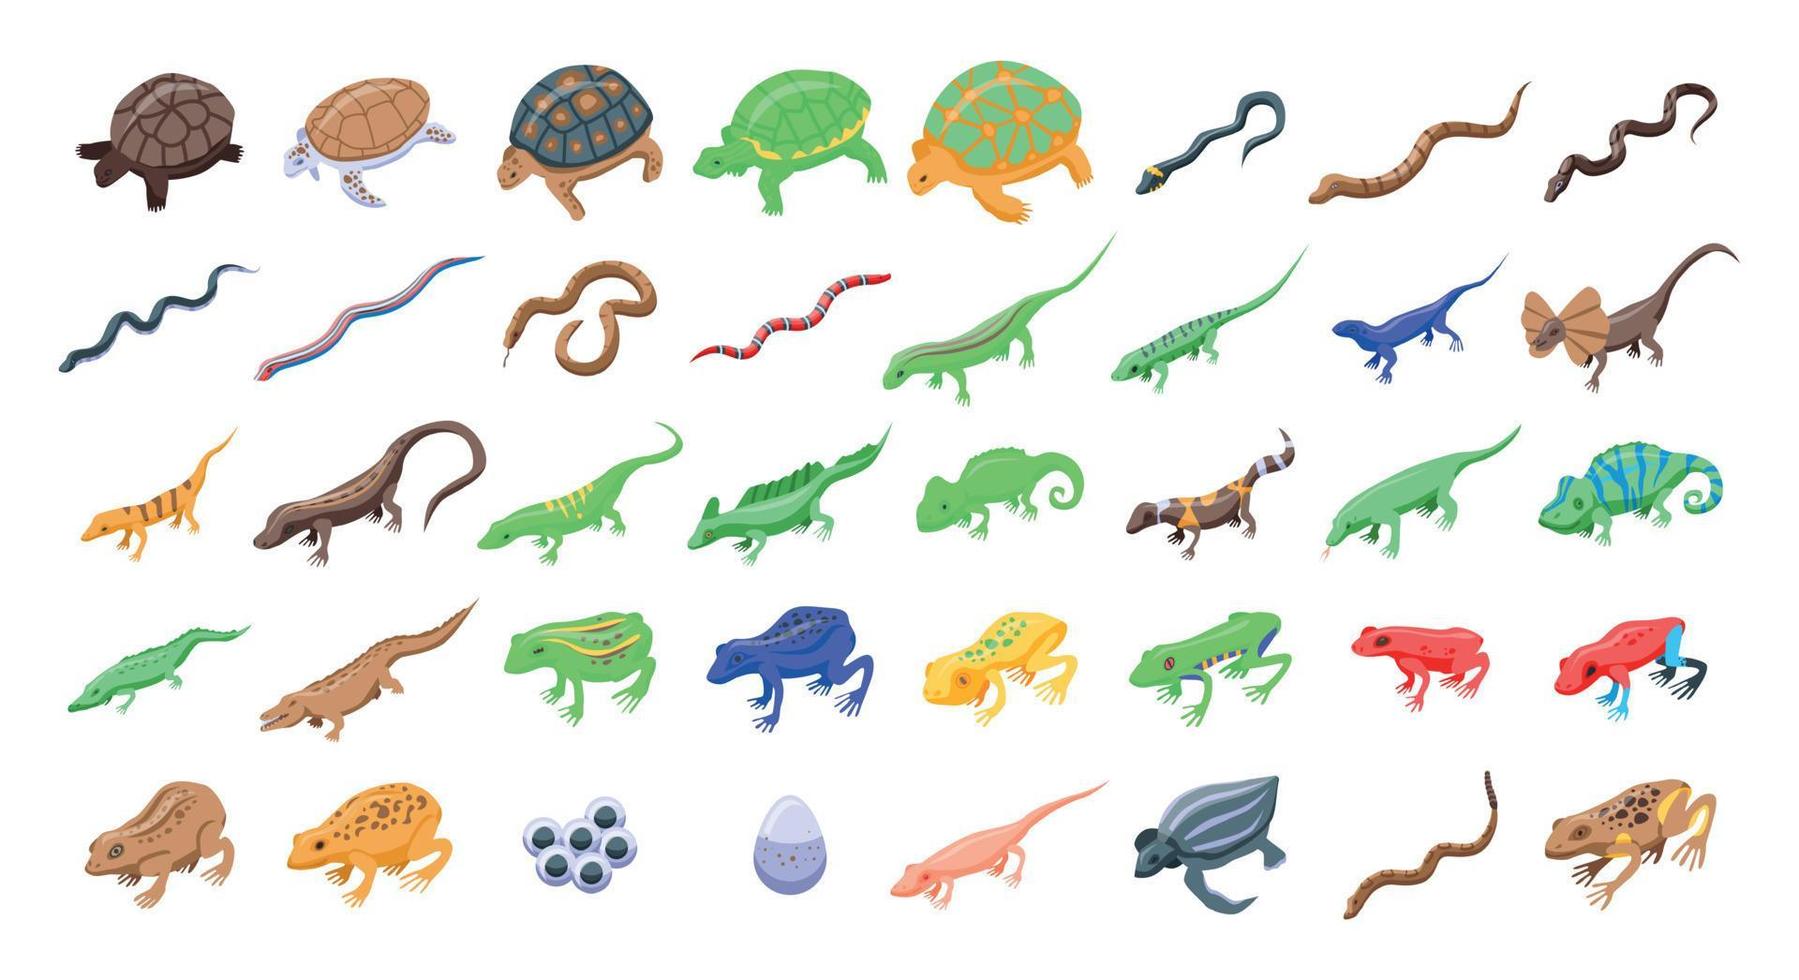 Reptiles and amphibians icons set, isometric style vector